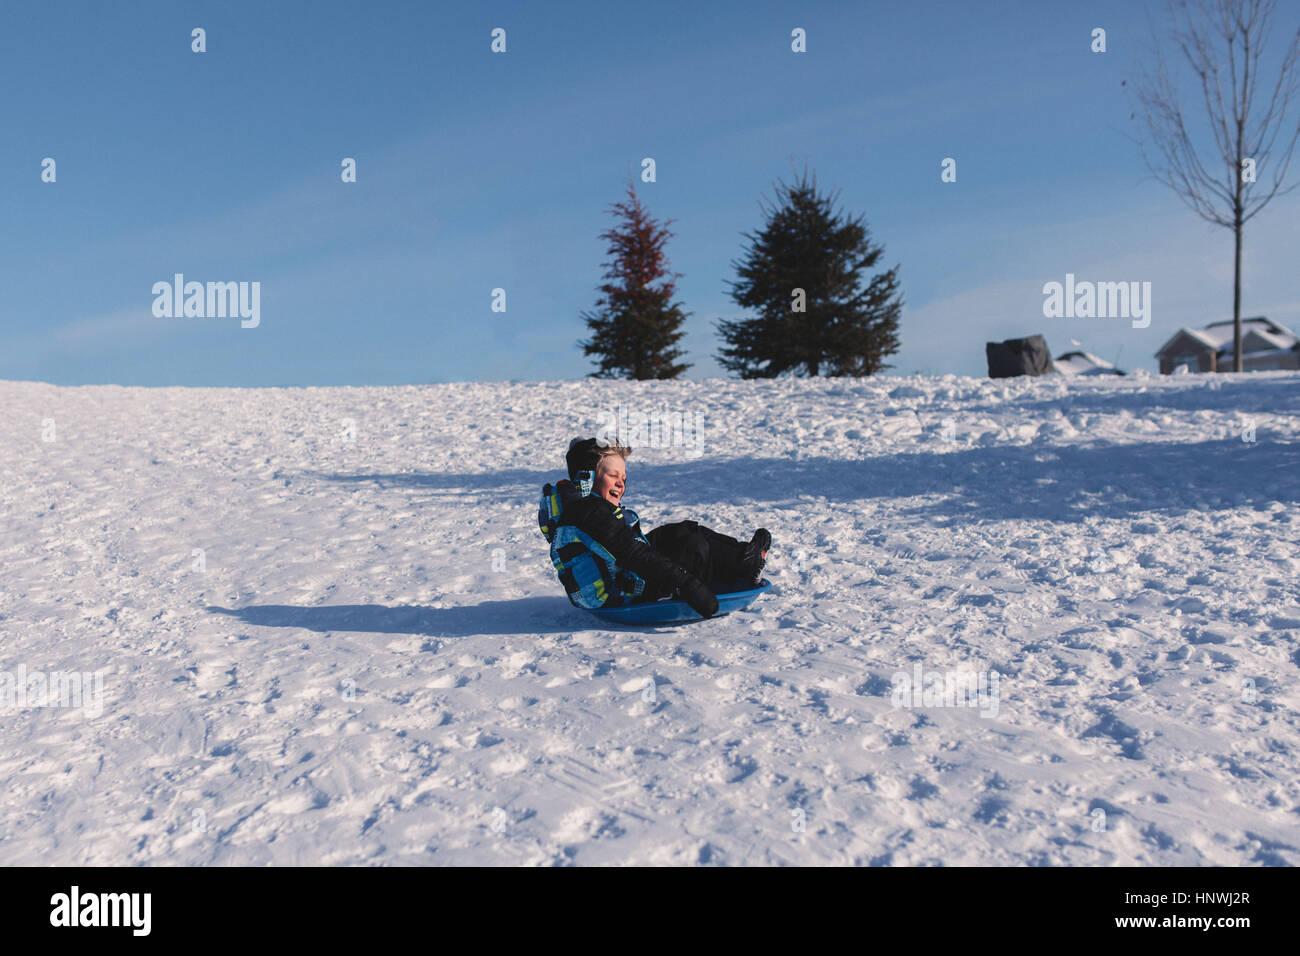 Boy in knit hat tobogganing down snow covered hill Stock Photo